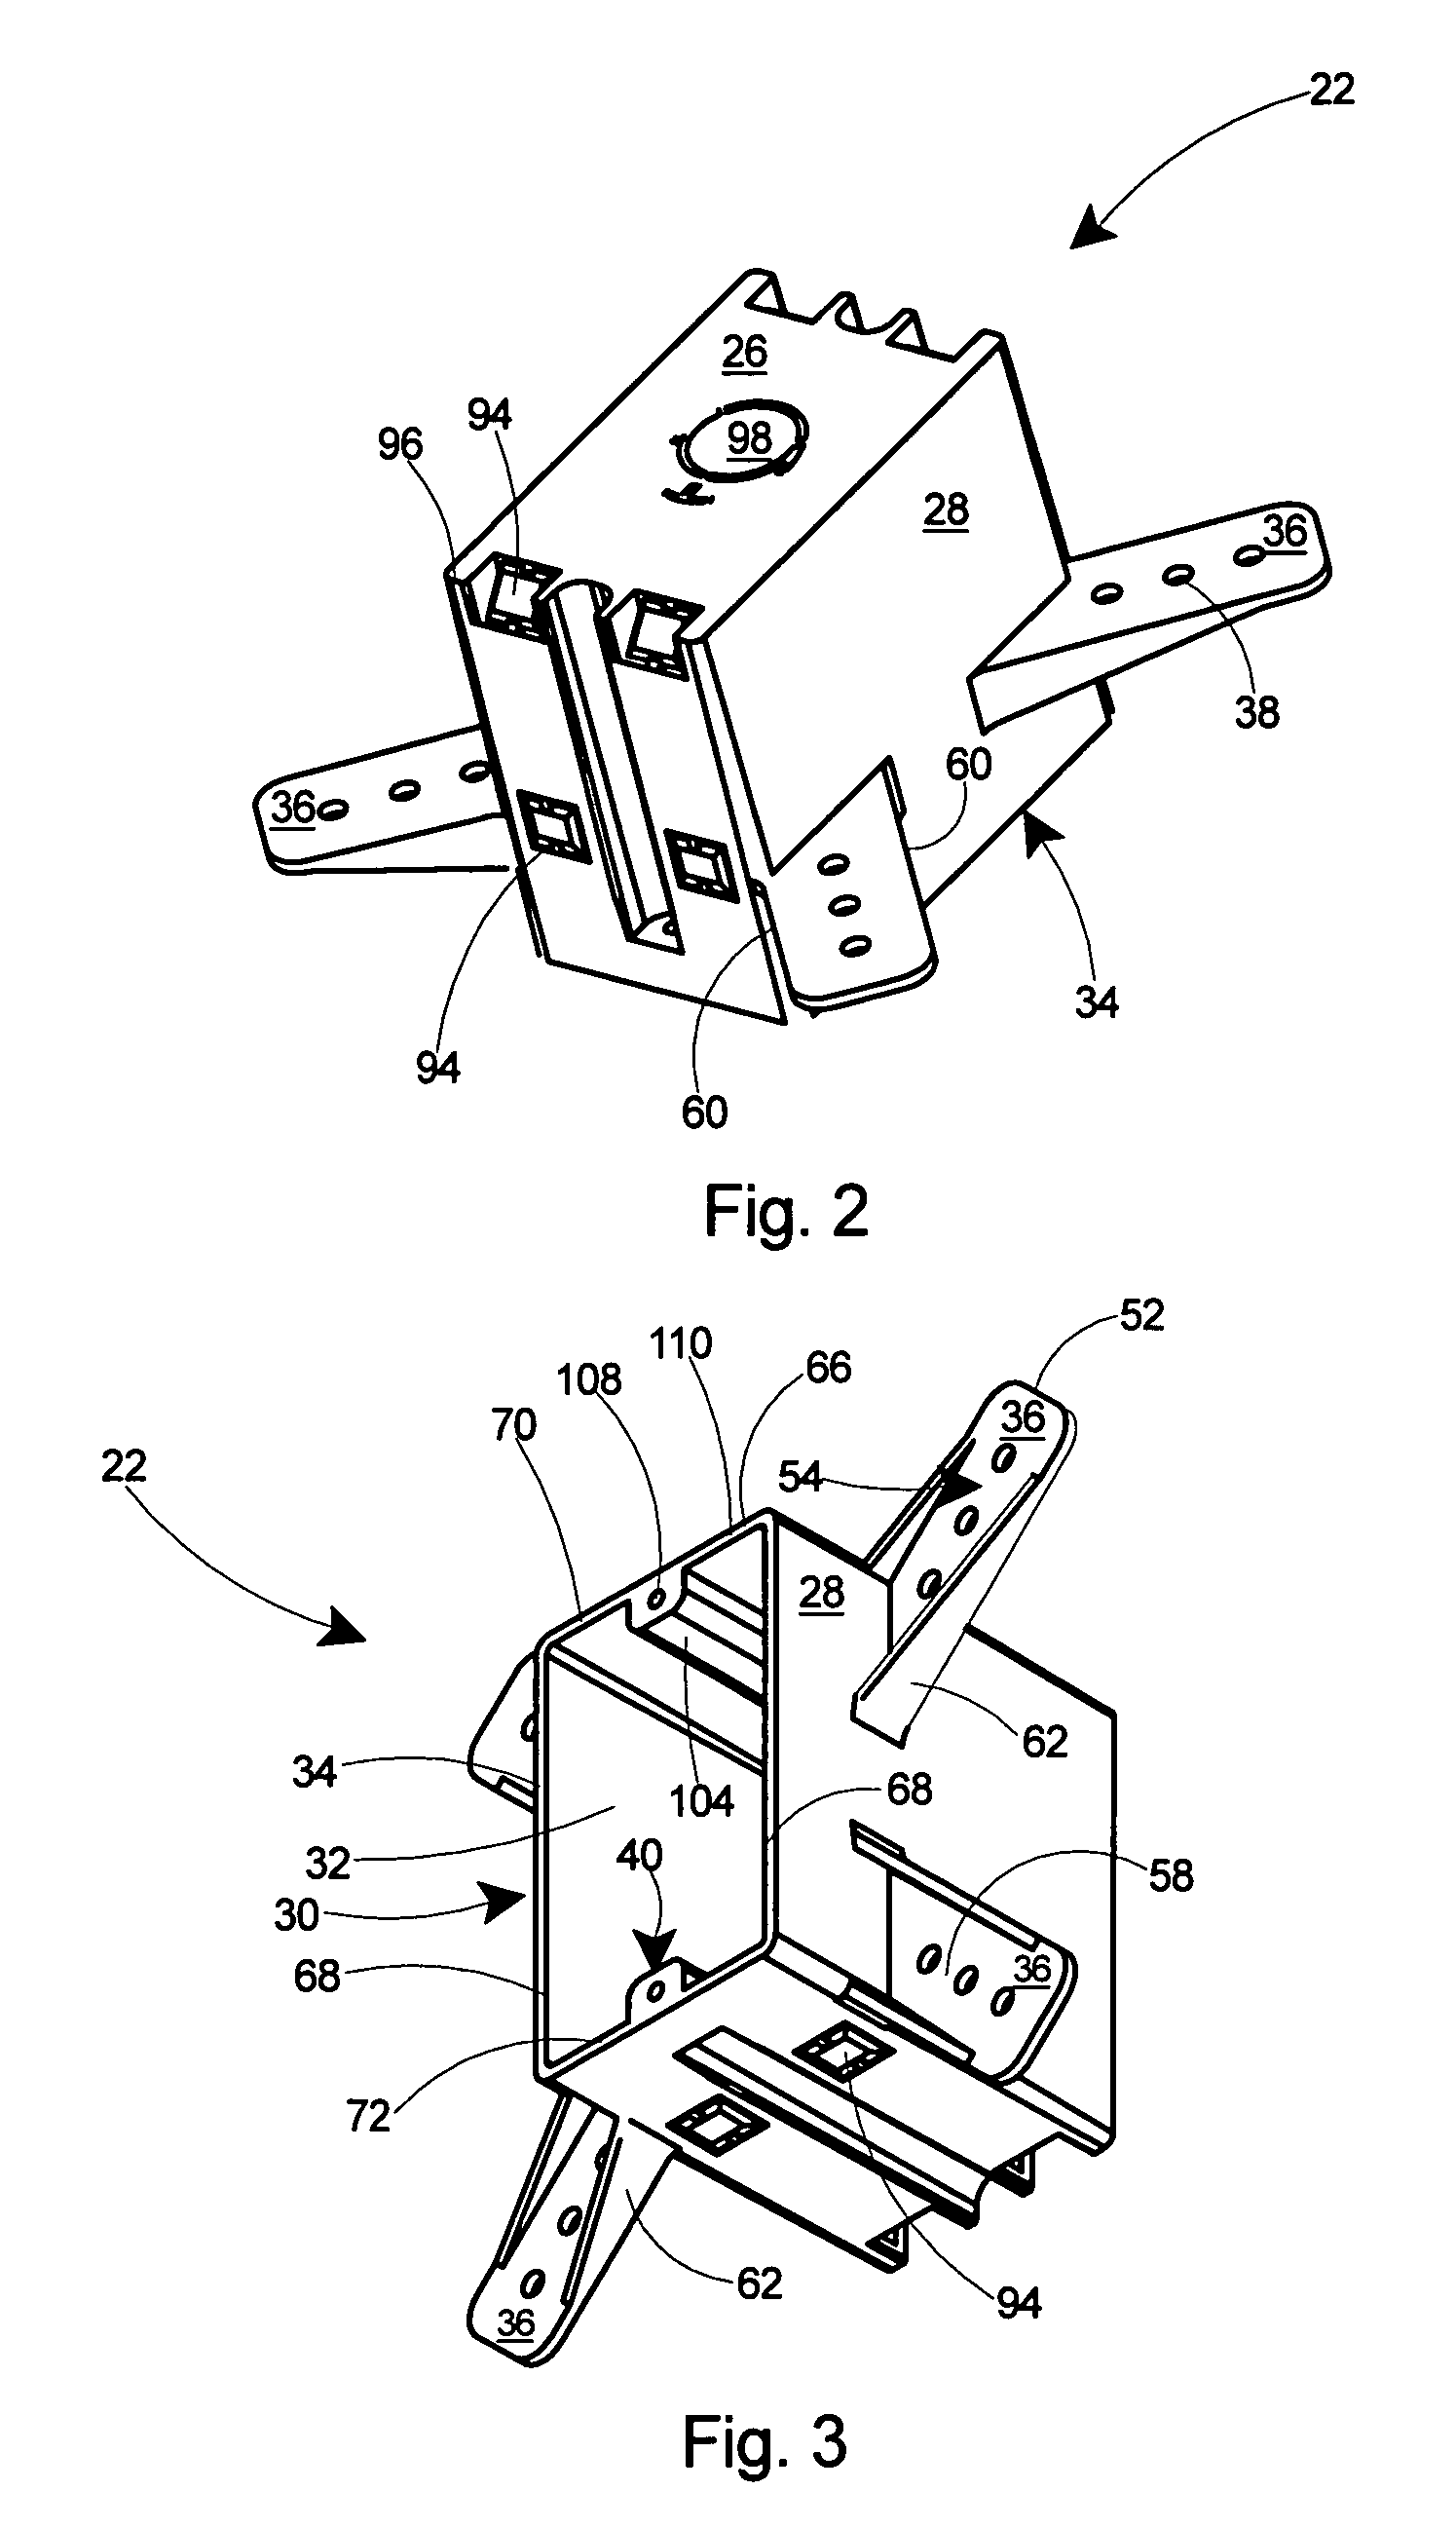 Outlet box assembly